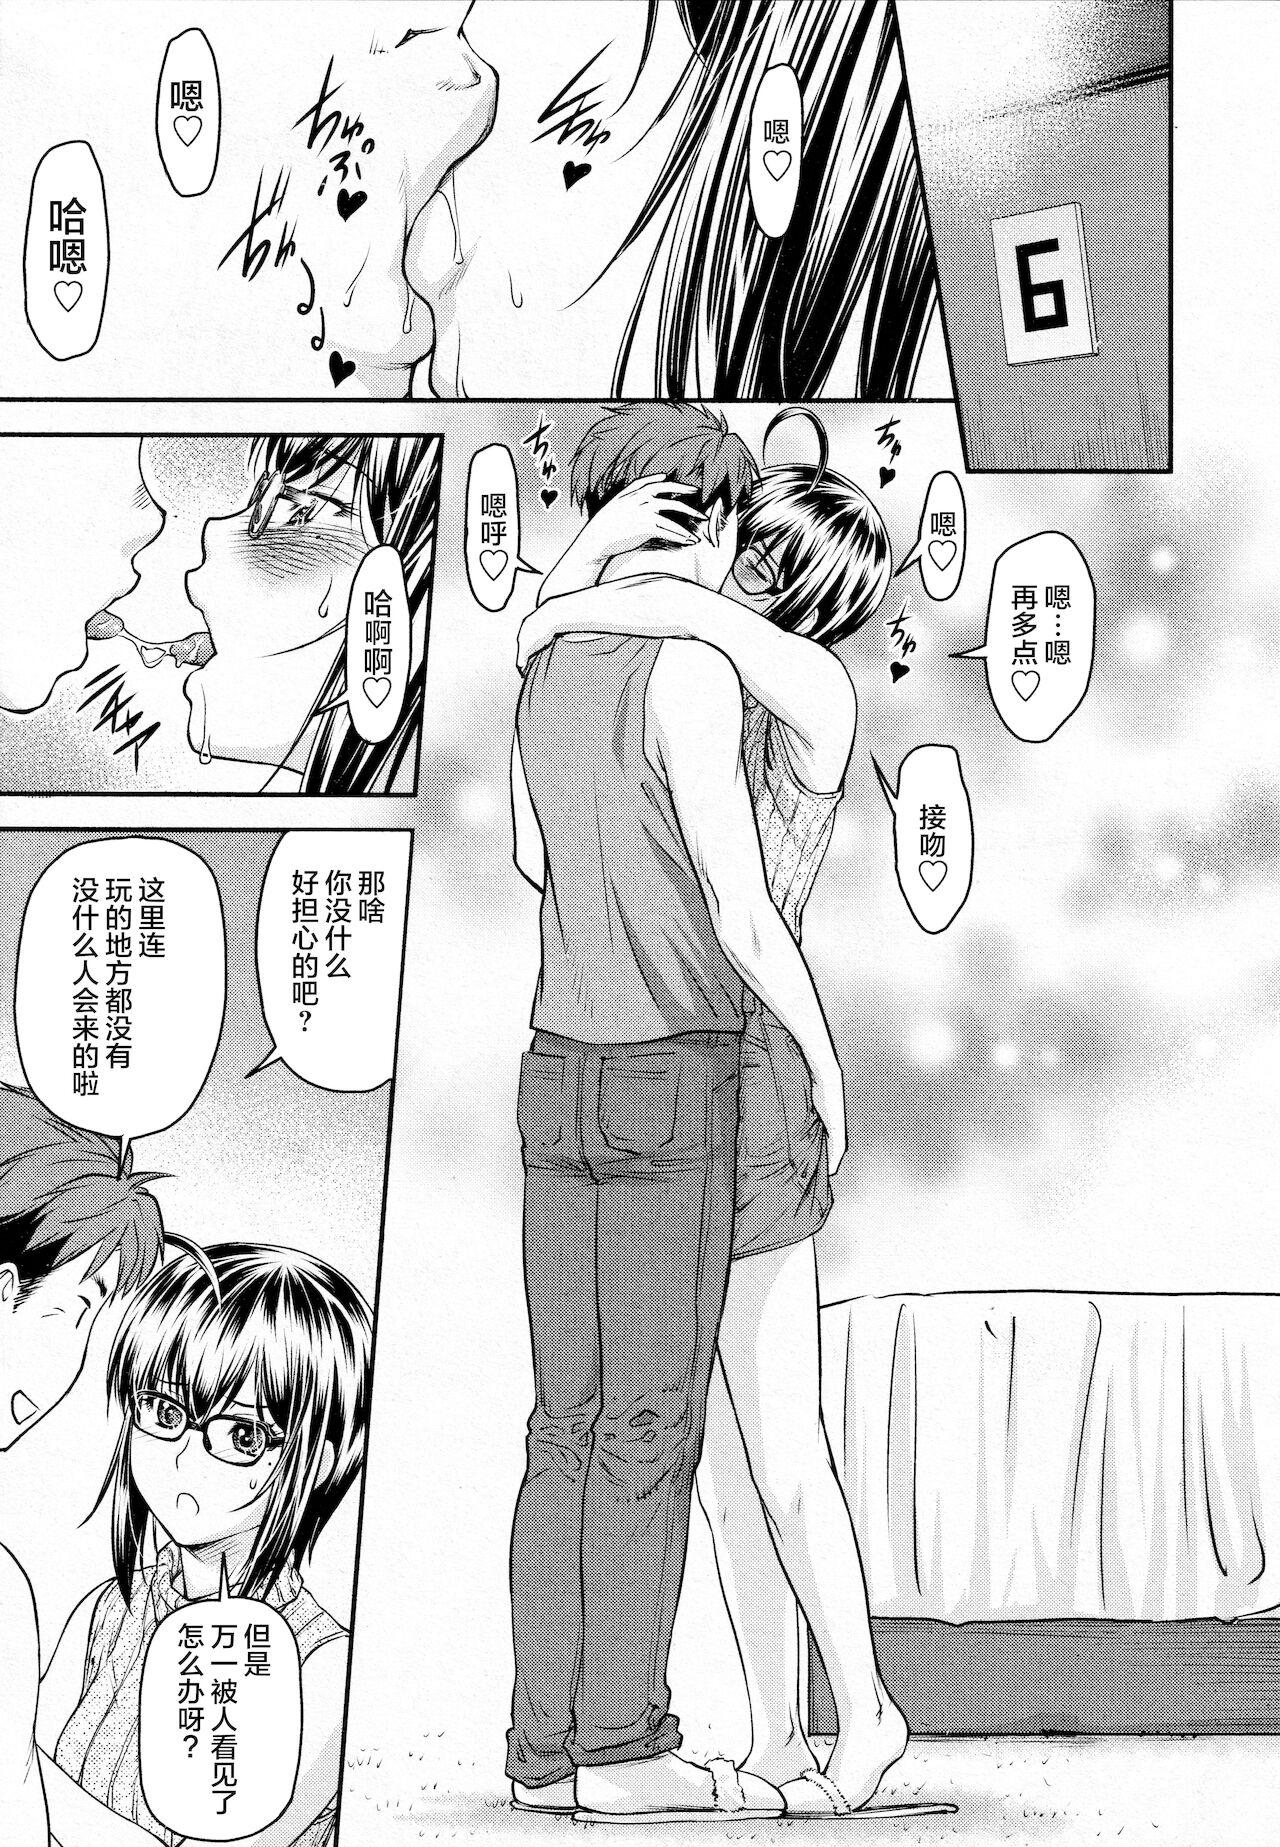 Hardfuck Kaname Date #12 Climax - Page 6